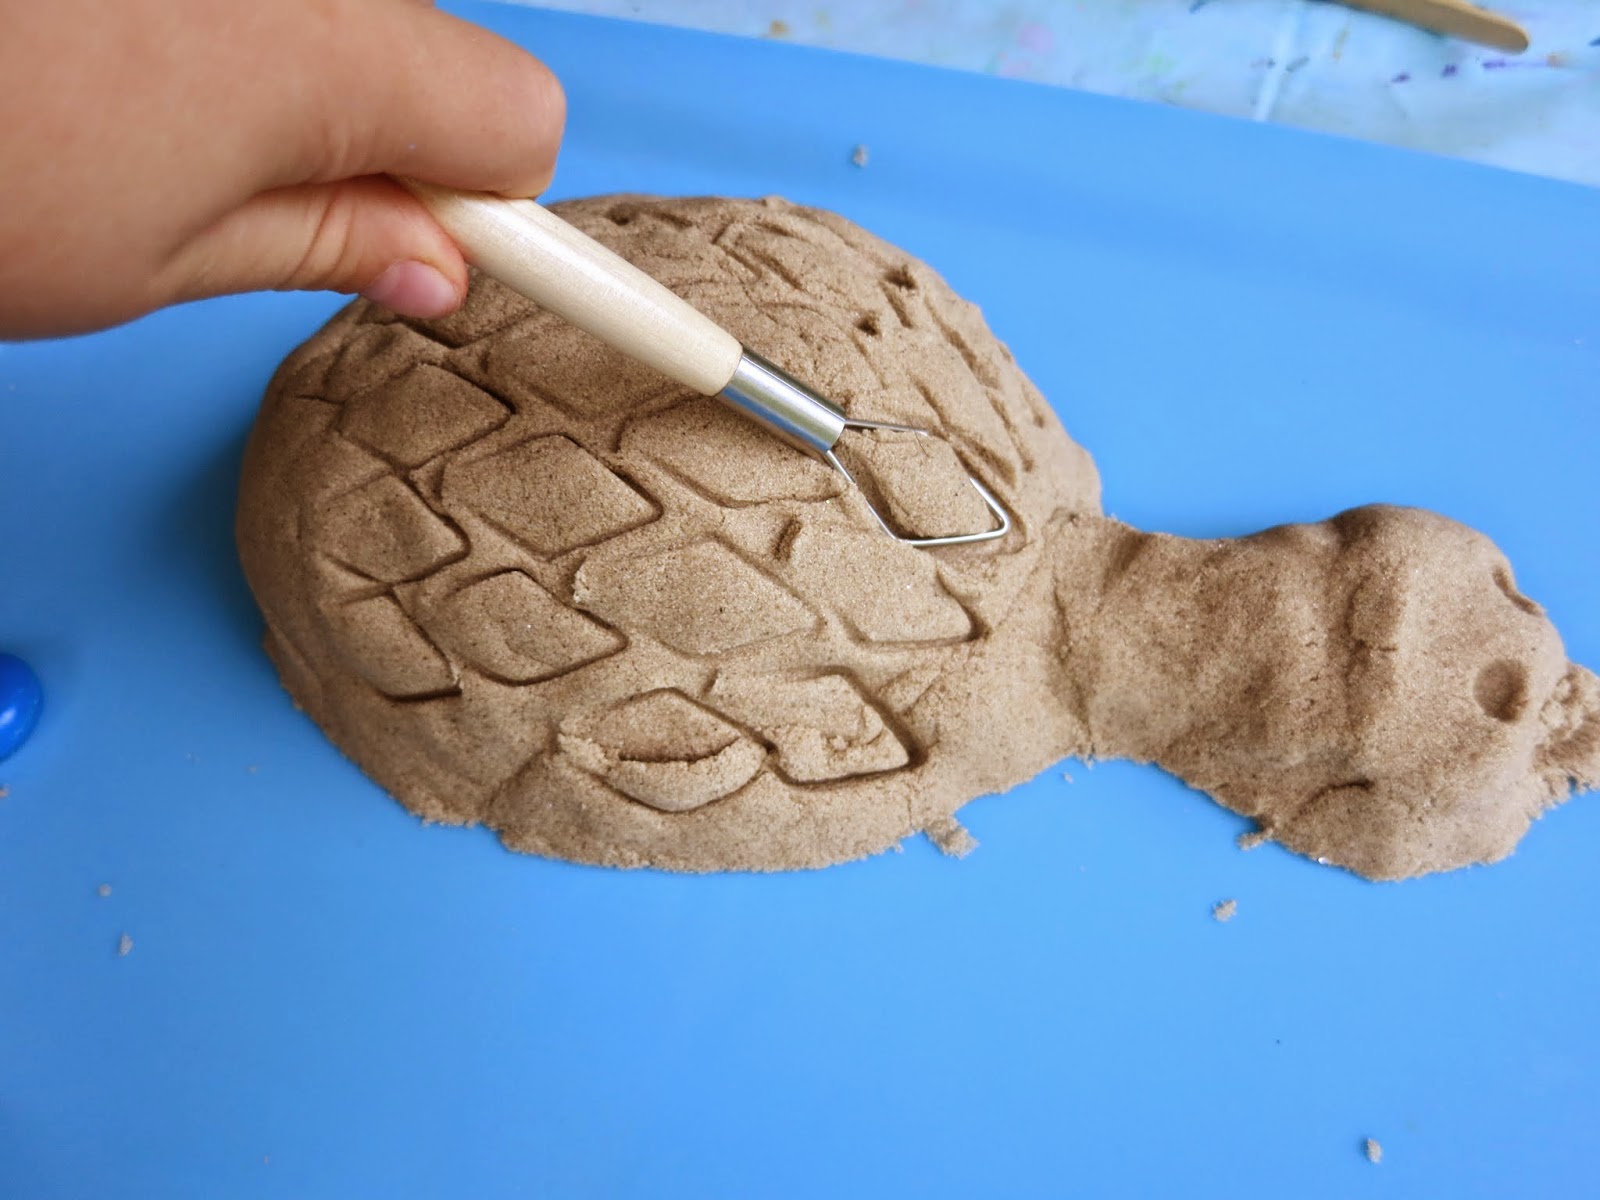 Modeling Clay Tools Kinetic Sand Stock Photo - Download Image Now - Child's  Play Clay, Cookie Cutter, Art and Craft Product - iStock